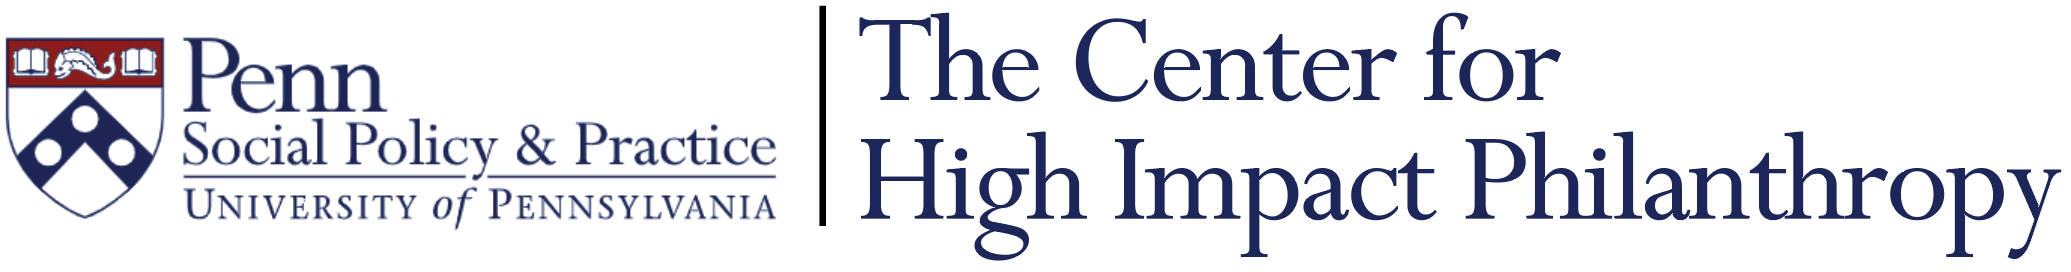 Home - Center for High Impact Philanthropy - University of